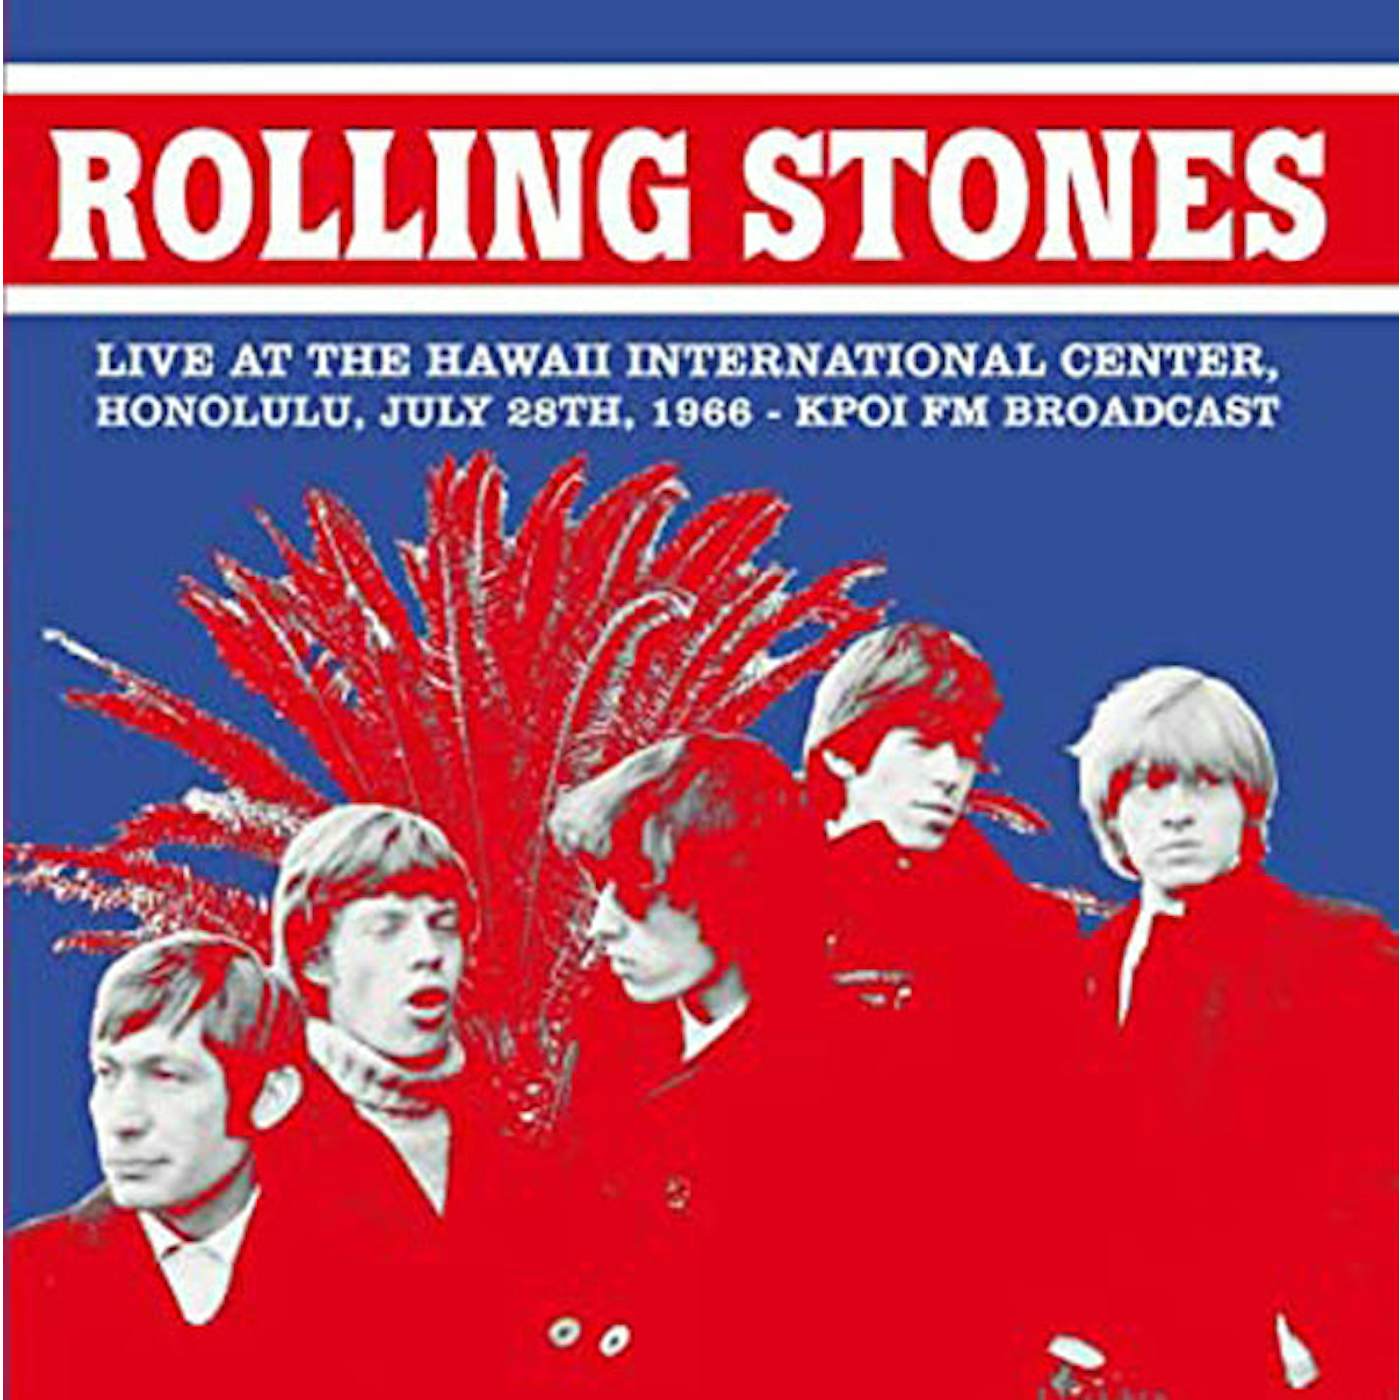 The Rolling Stones LP - Live At The Hawaii International Center, Honolulu July 28 1966 - Kpoi Fm Broadcast (Vinyl)